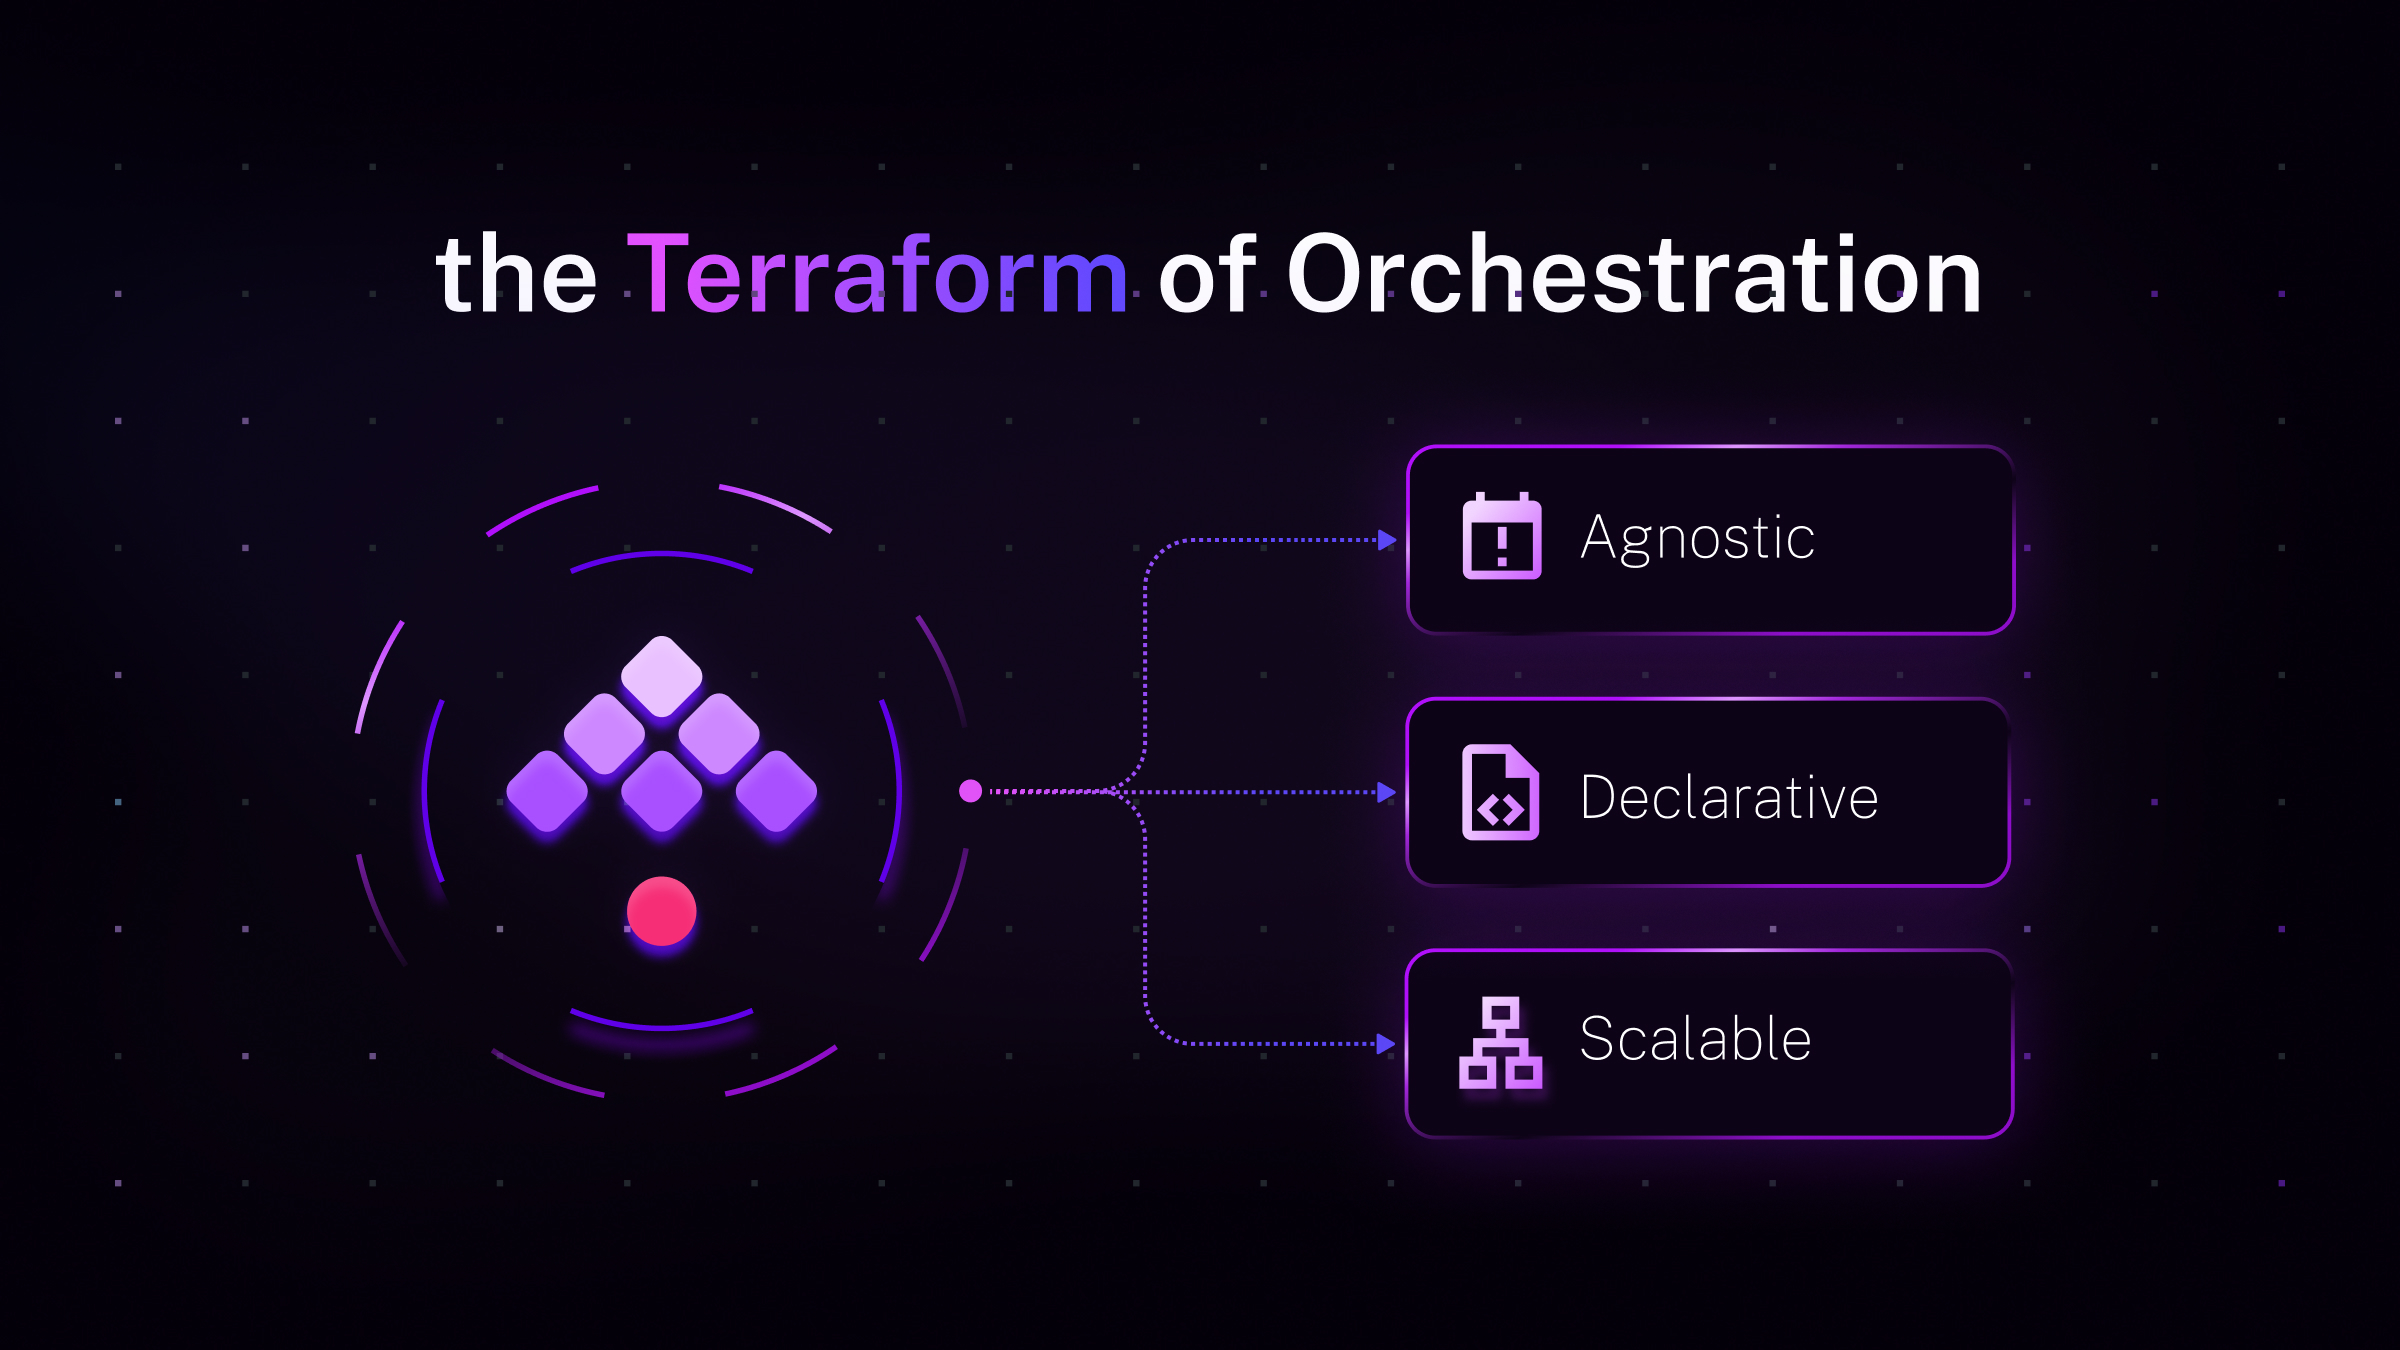 Kestra: The Terraform of Automation and Orchestration